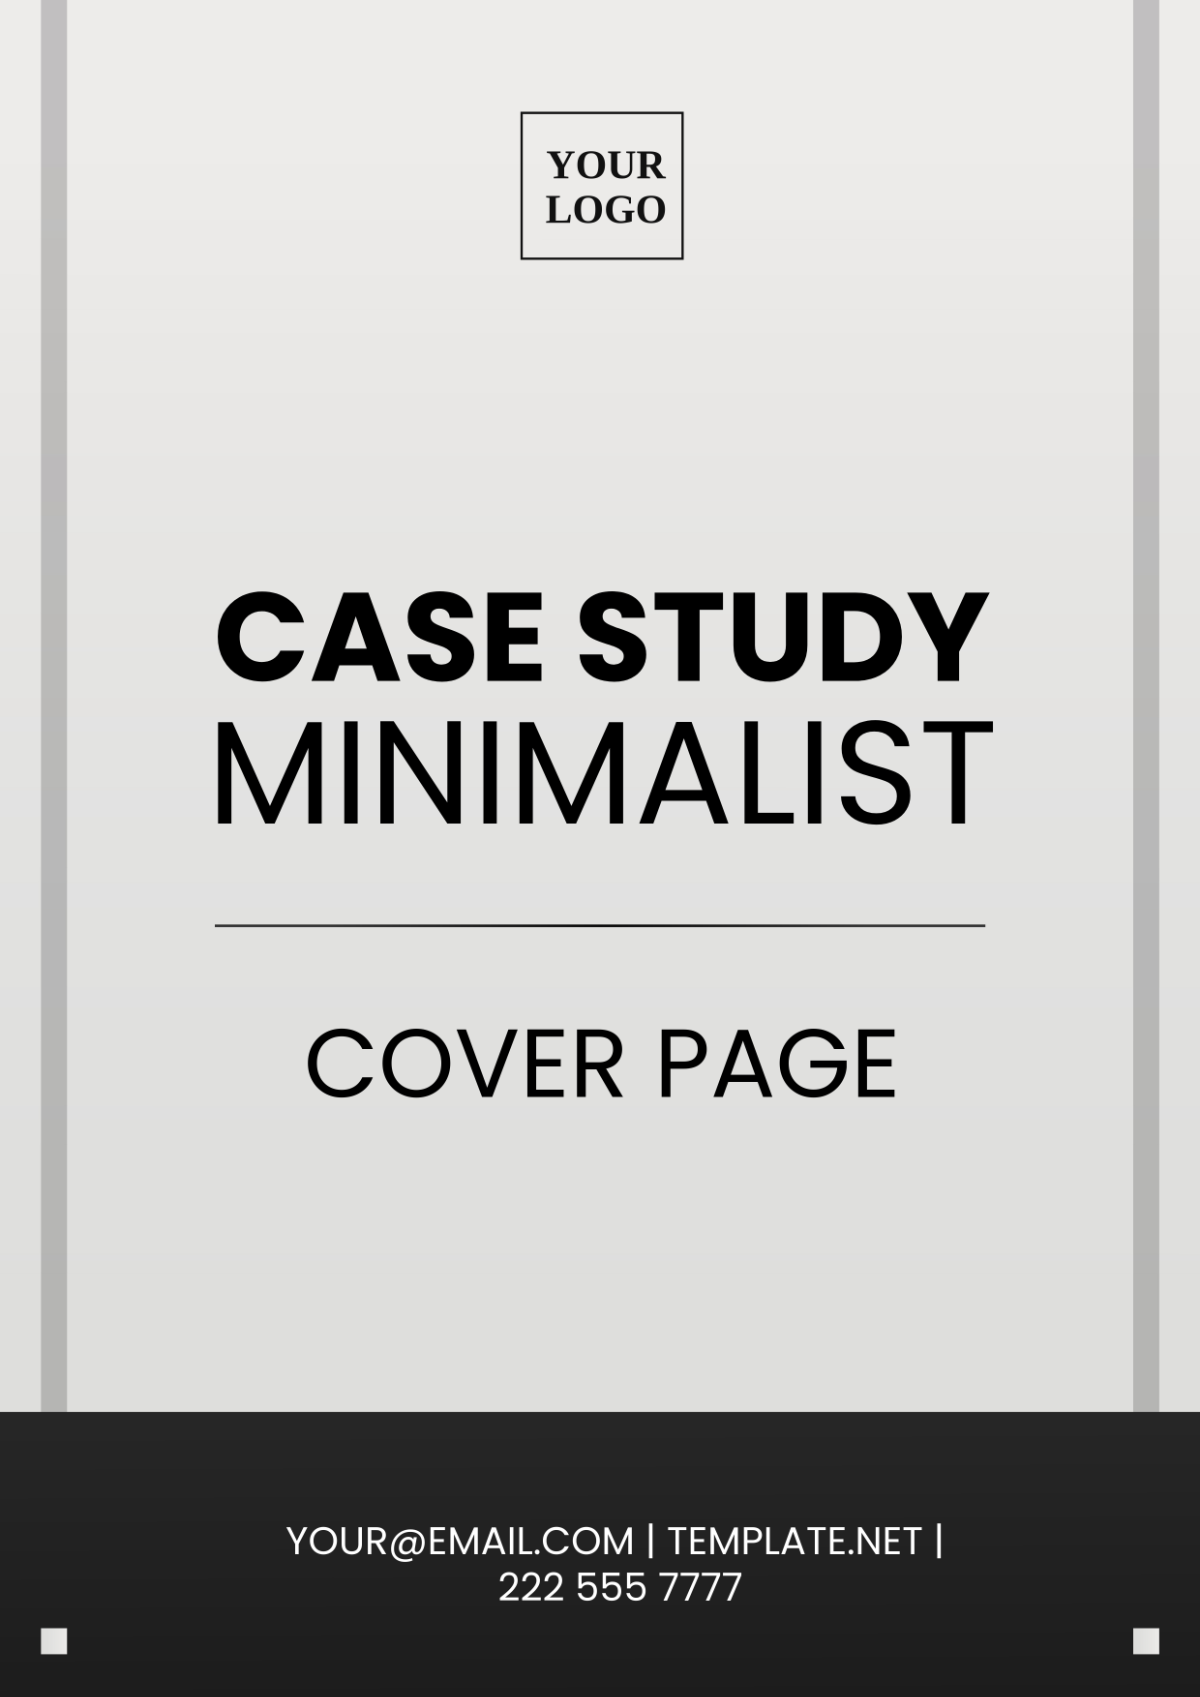 Case Study Minimalist Cover Page